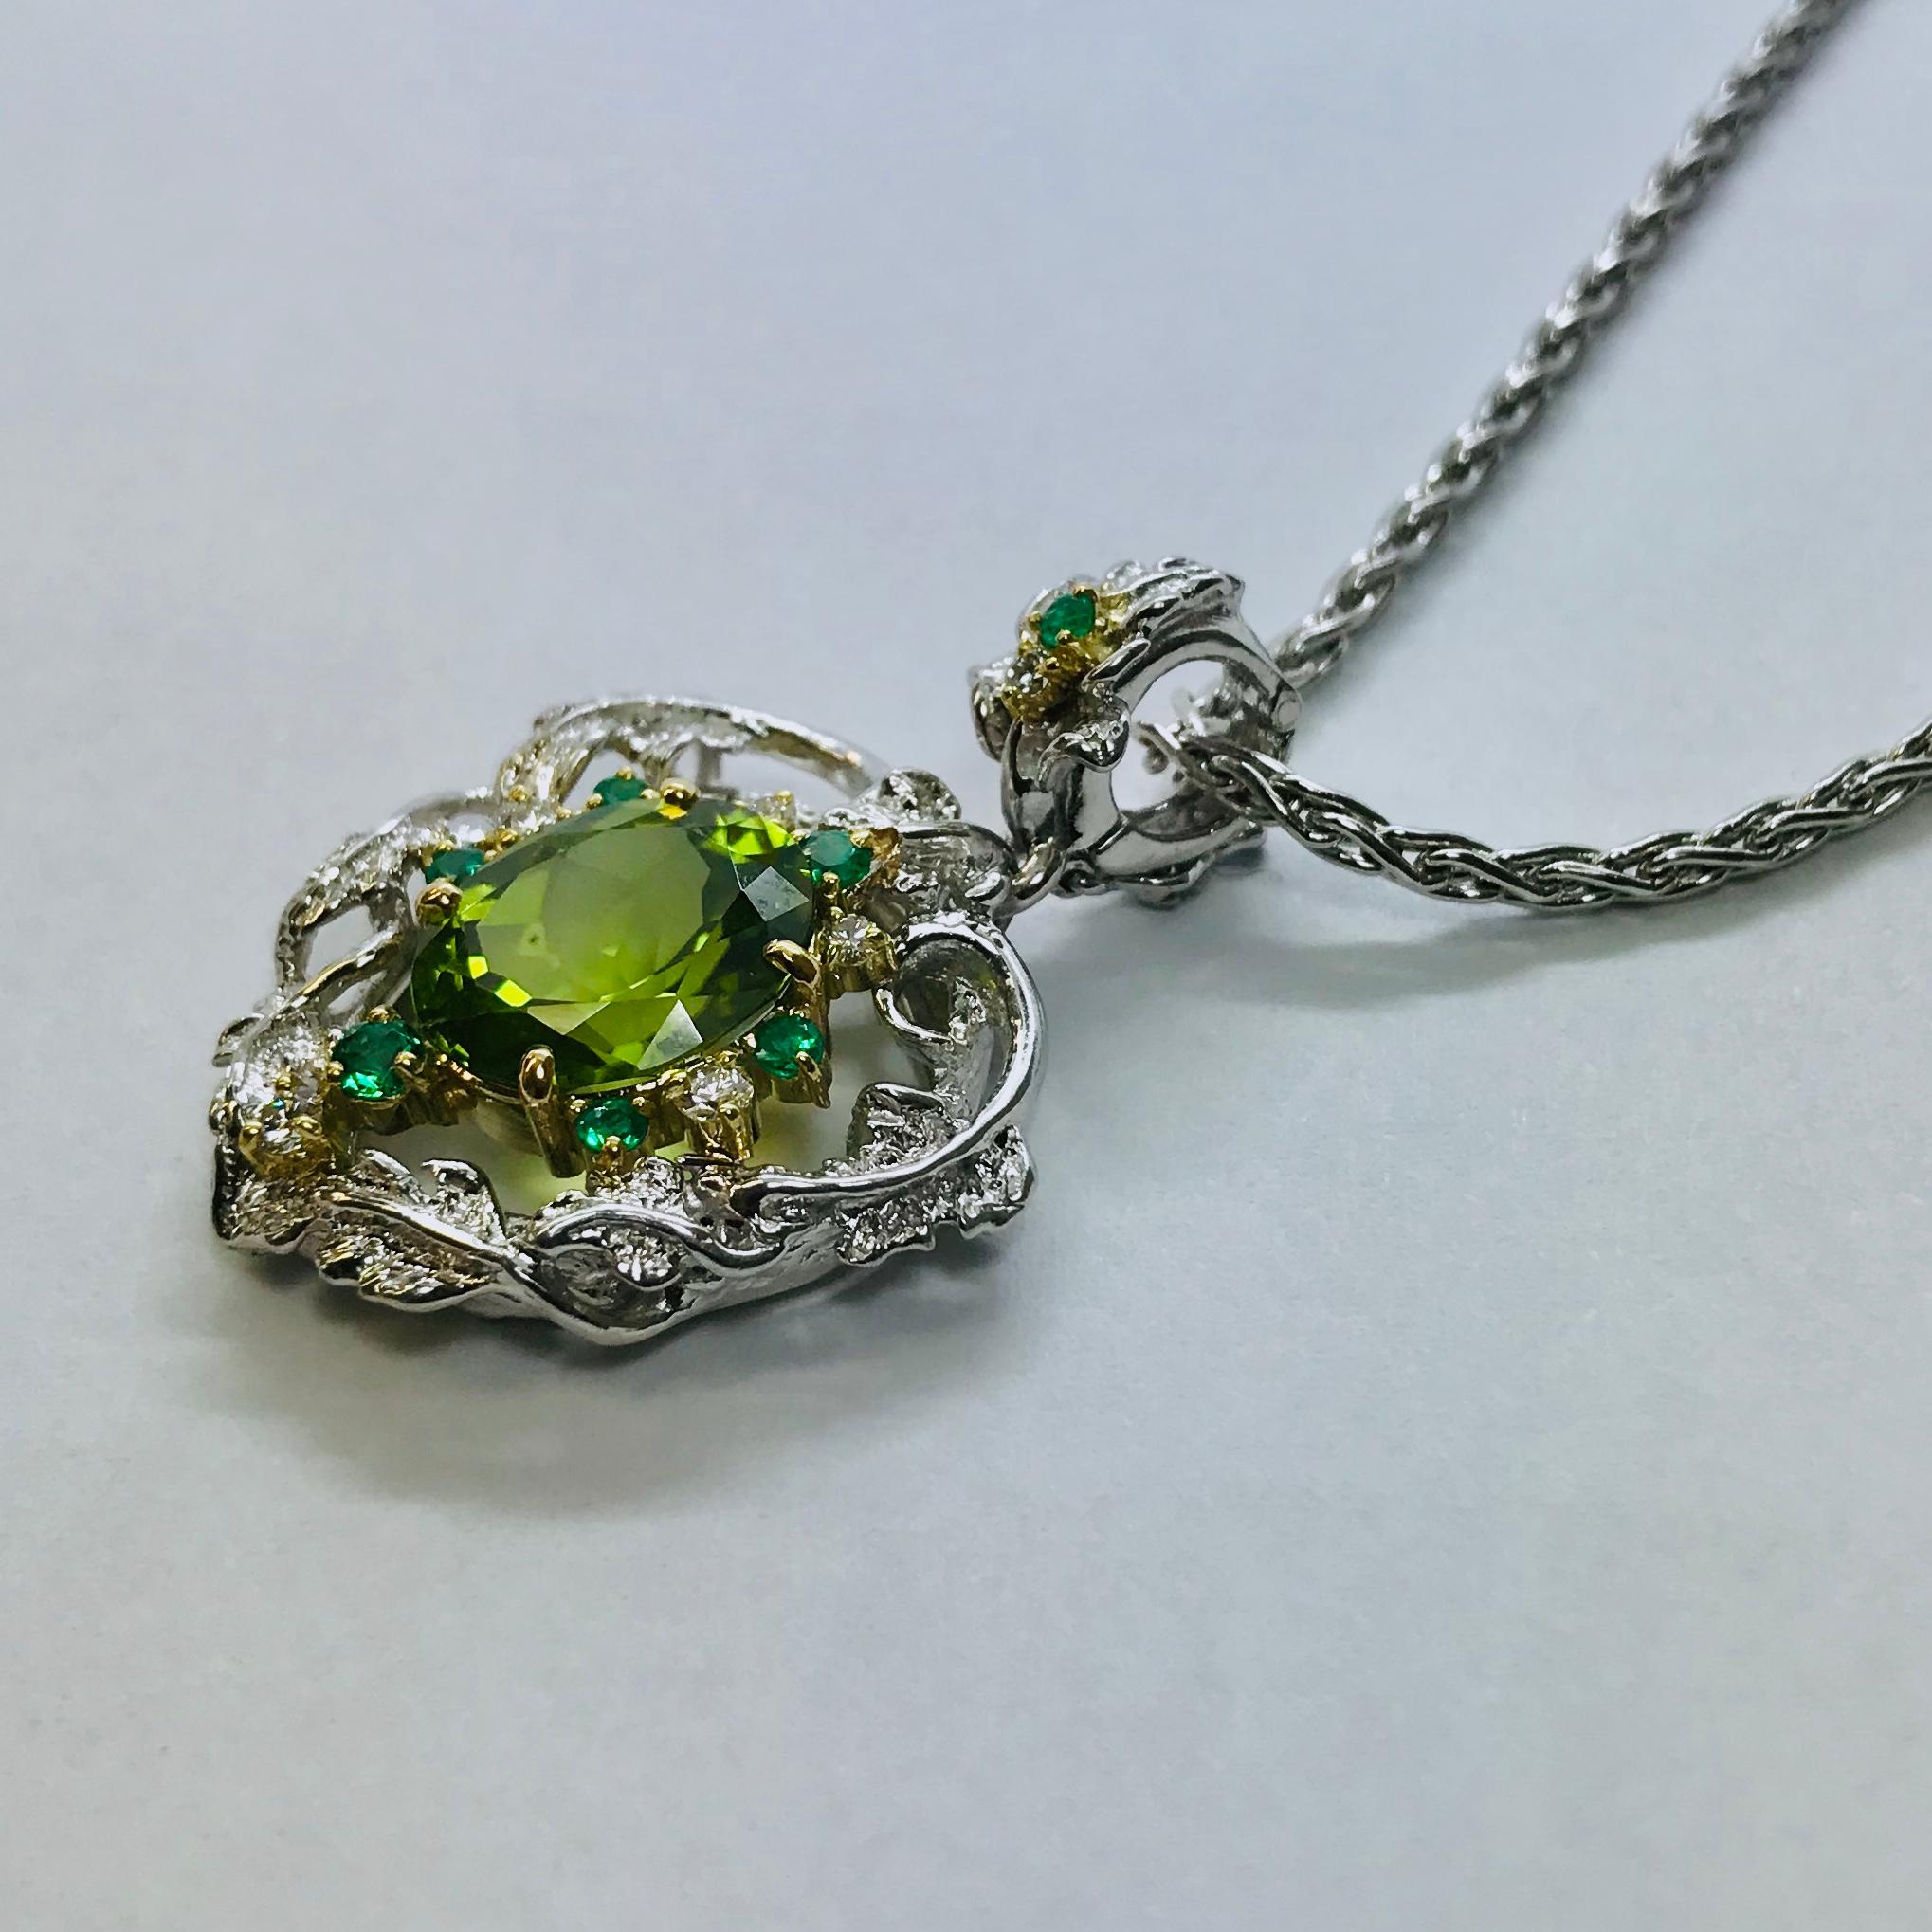 All buyers outside of Japan will receive -10% tax exemption from the list price. 
Please inquire for details.
Peridot : 4.91ct Emerald : 0.24ct / Diamonds : 0.16ct
Approximate Size of the center stone : L9.85mm W11.55mm
Necklace Chain K18